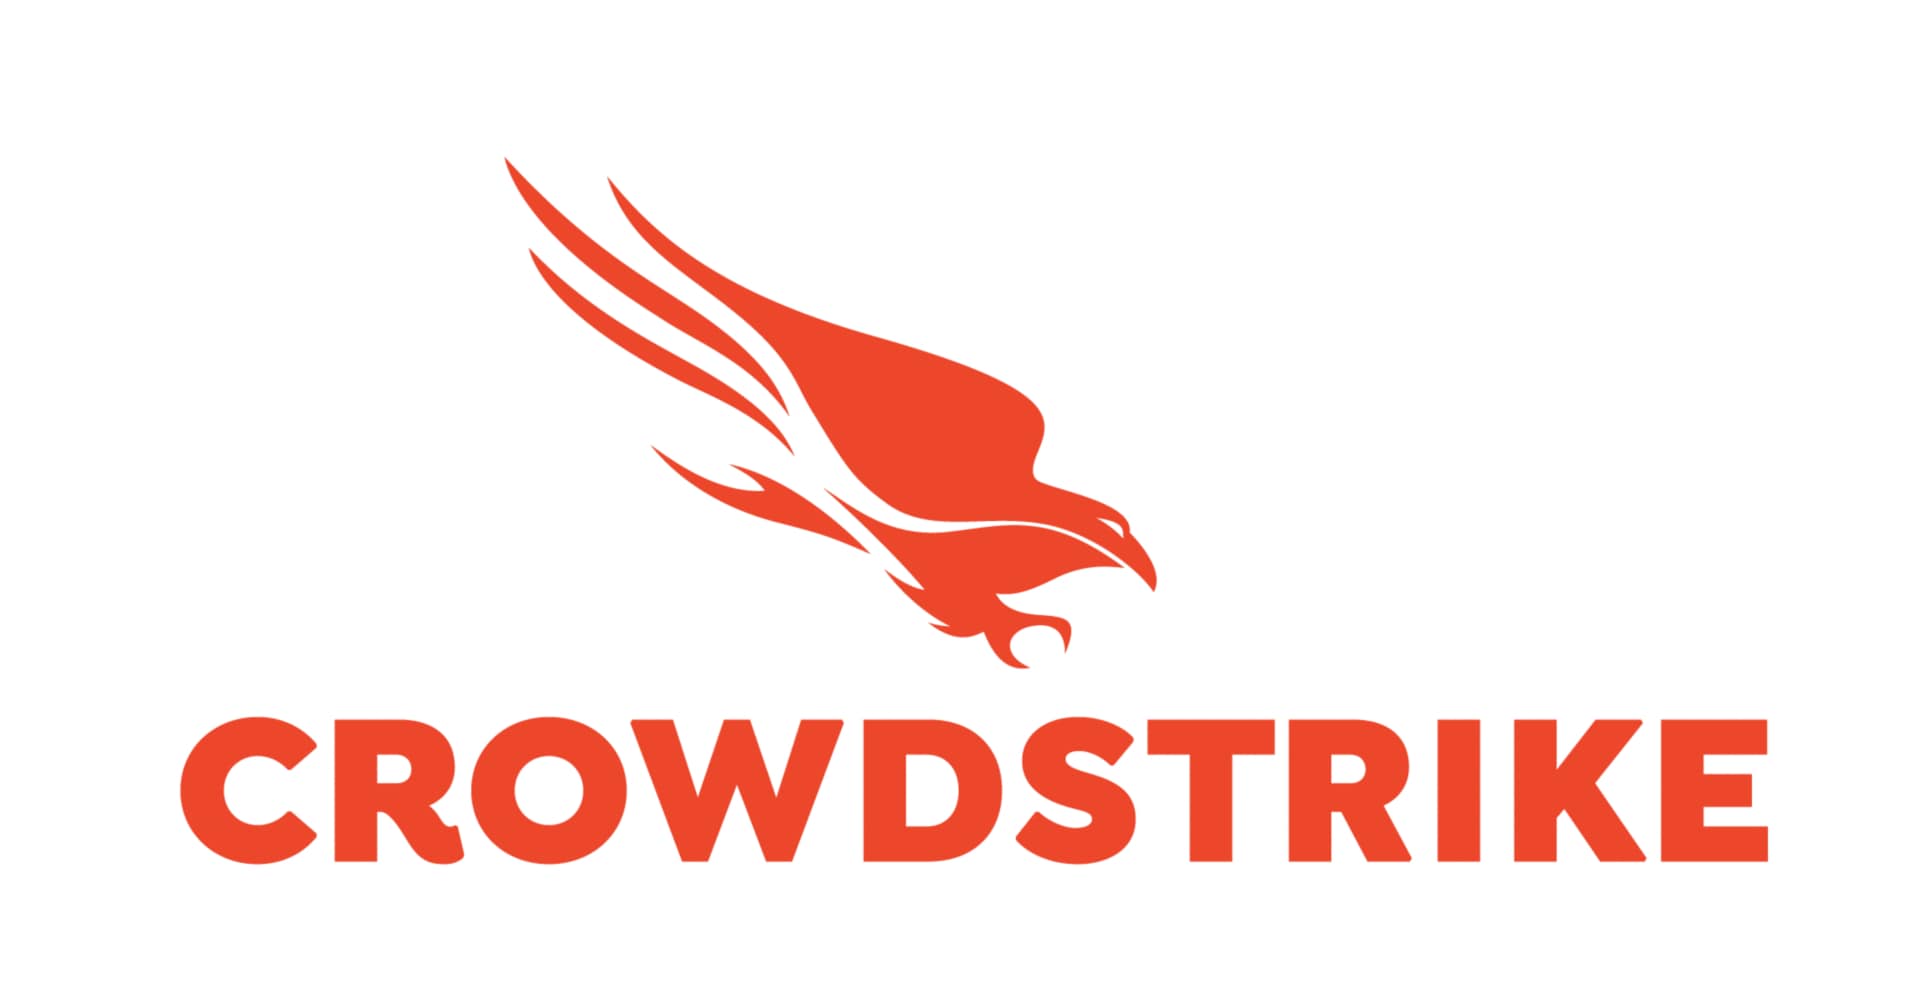 CrowdStrike Falcon Device Control 10 Software Subscription (5,000-9,999 Licenses)